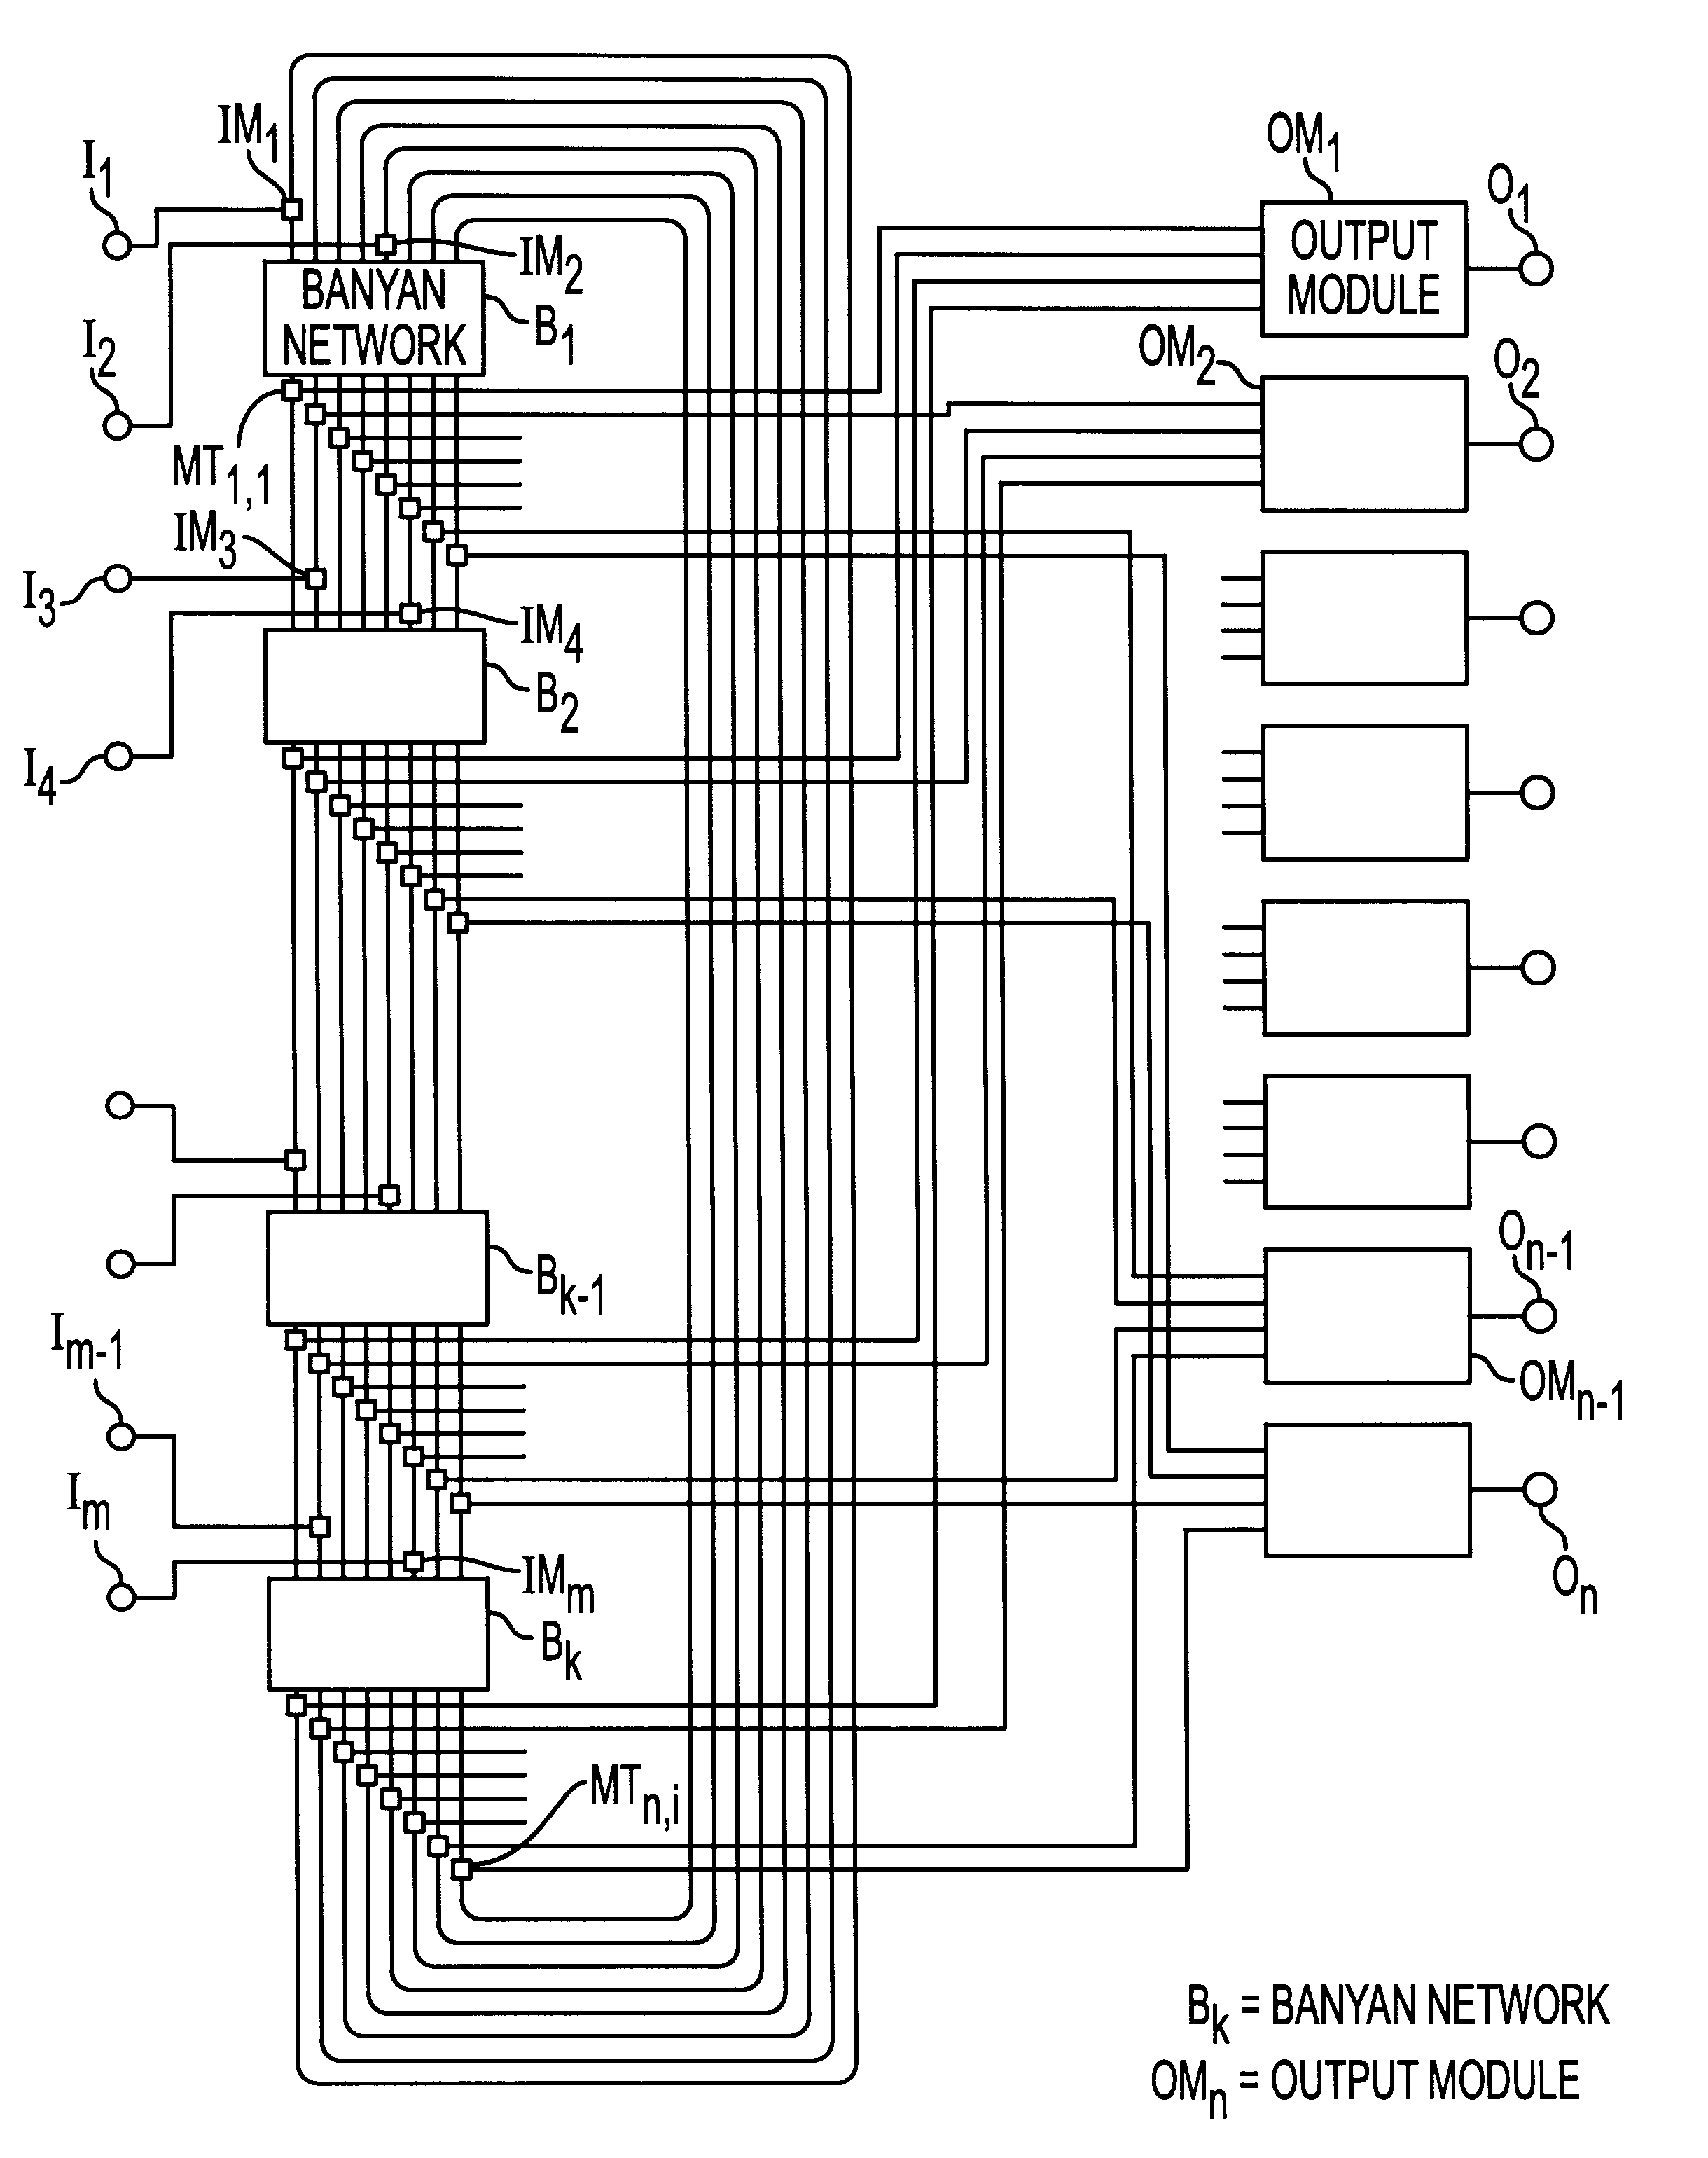 System for switching high-capacity and variable length packets